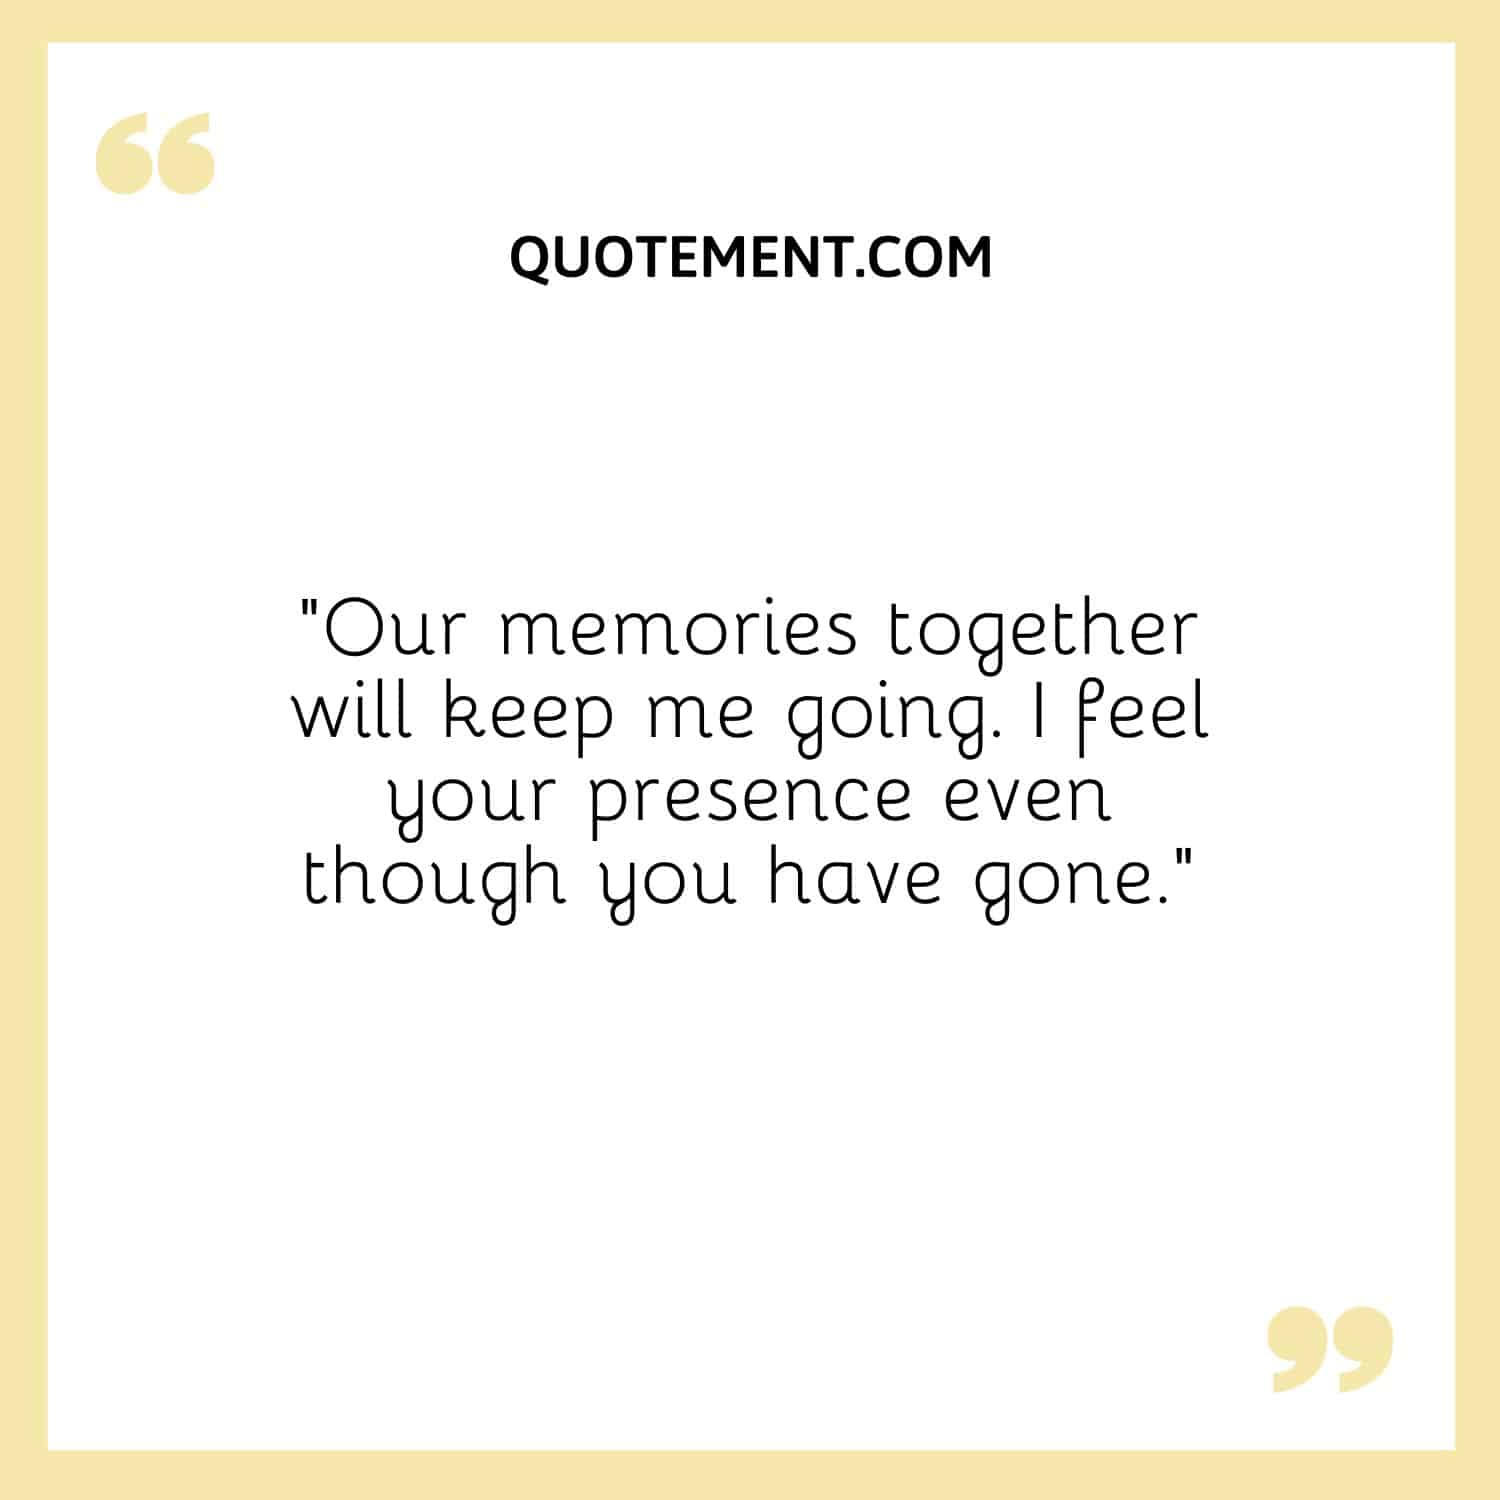 Our memories together will keep me going